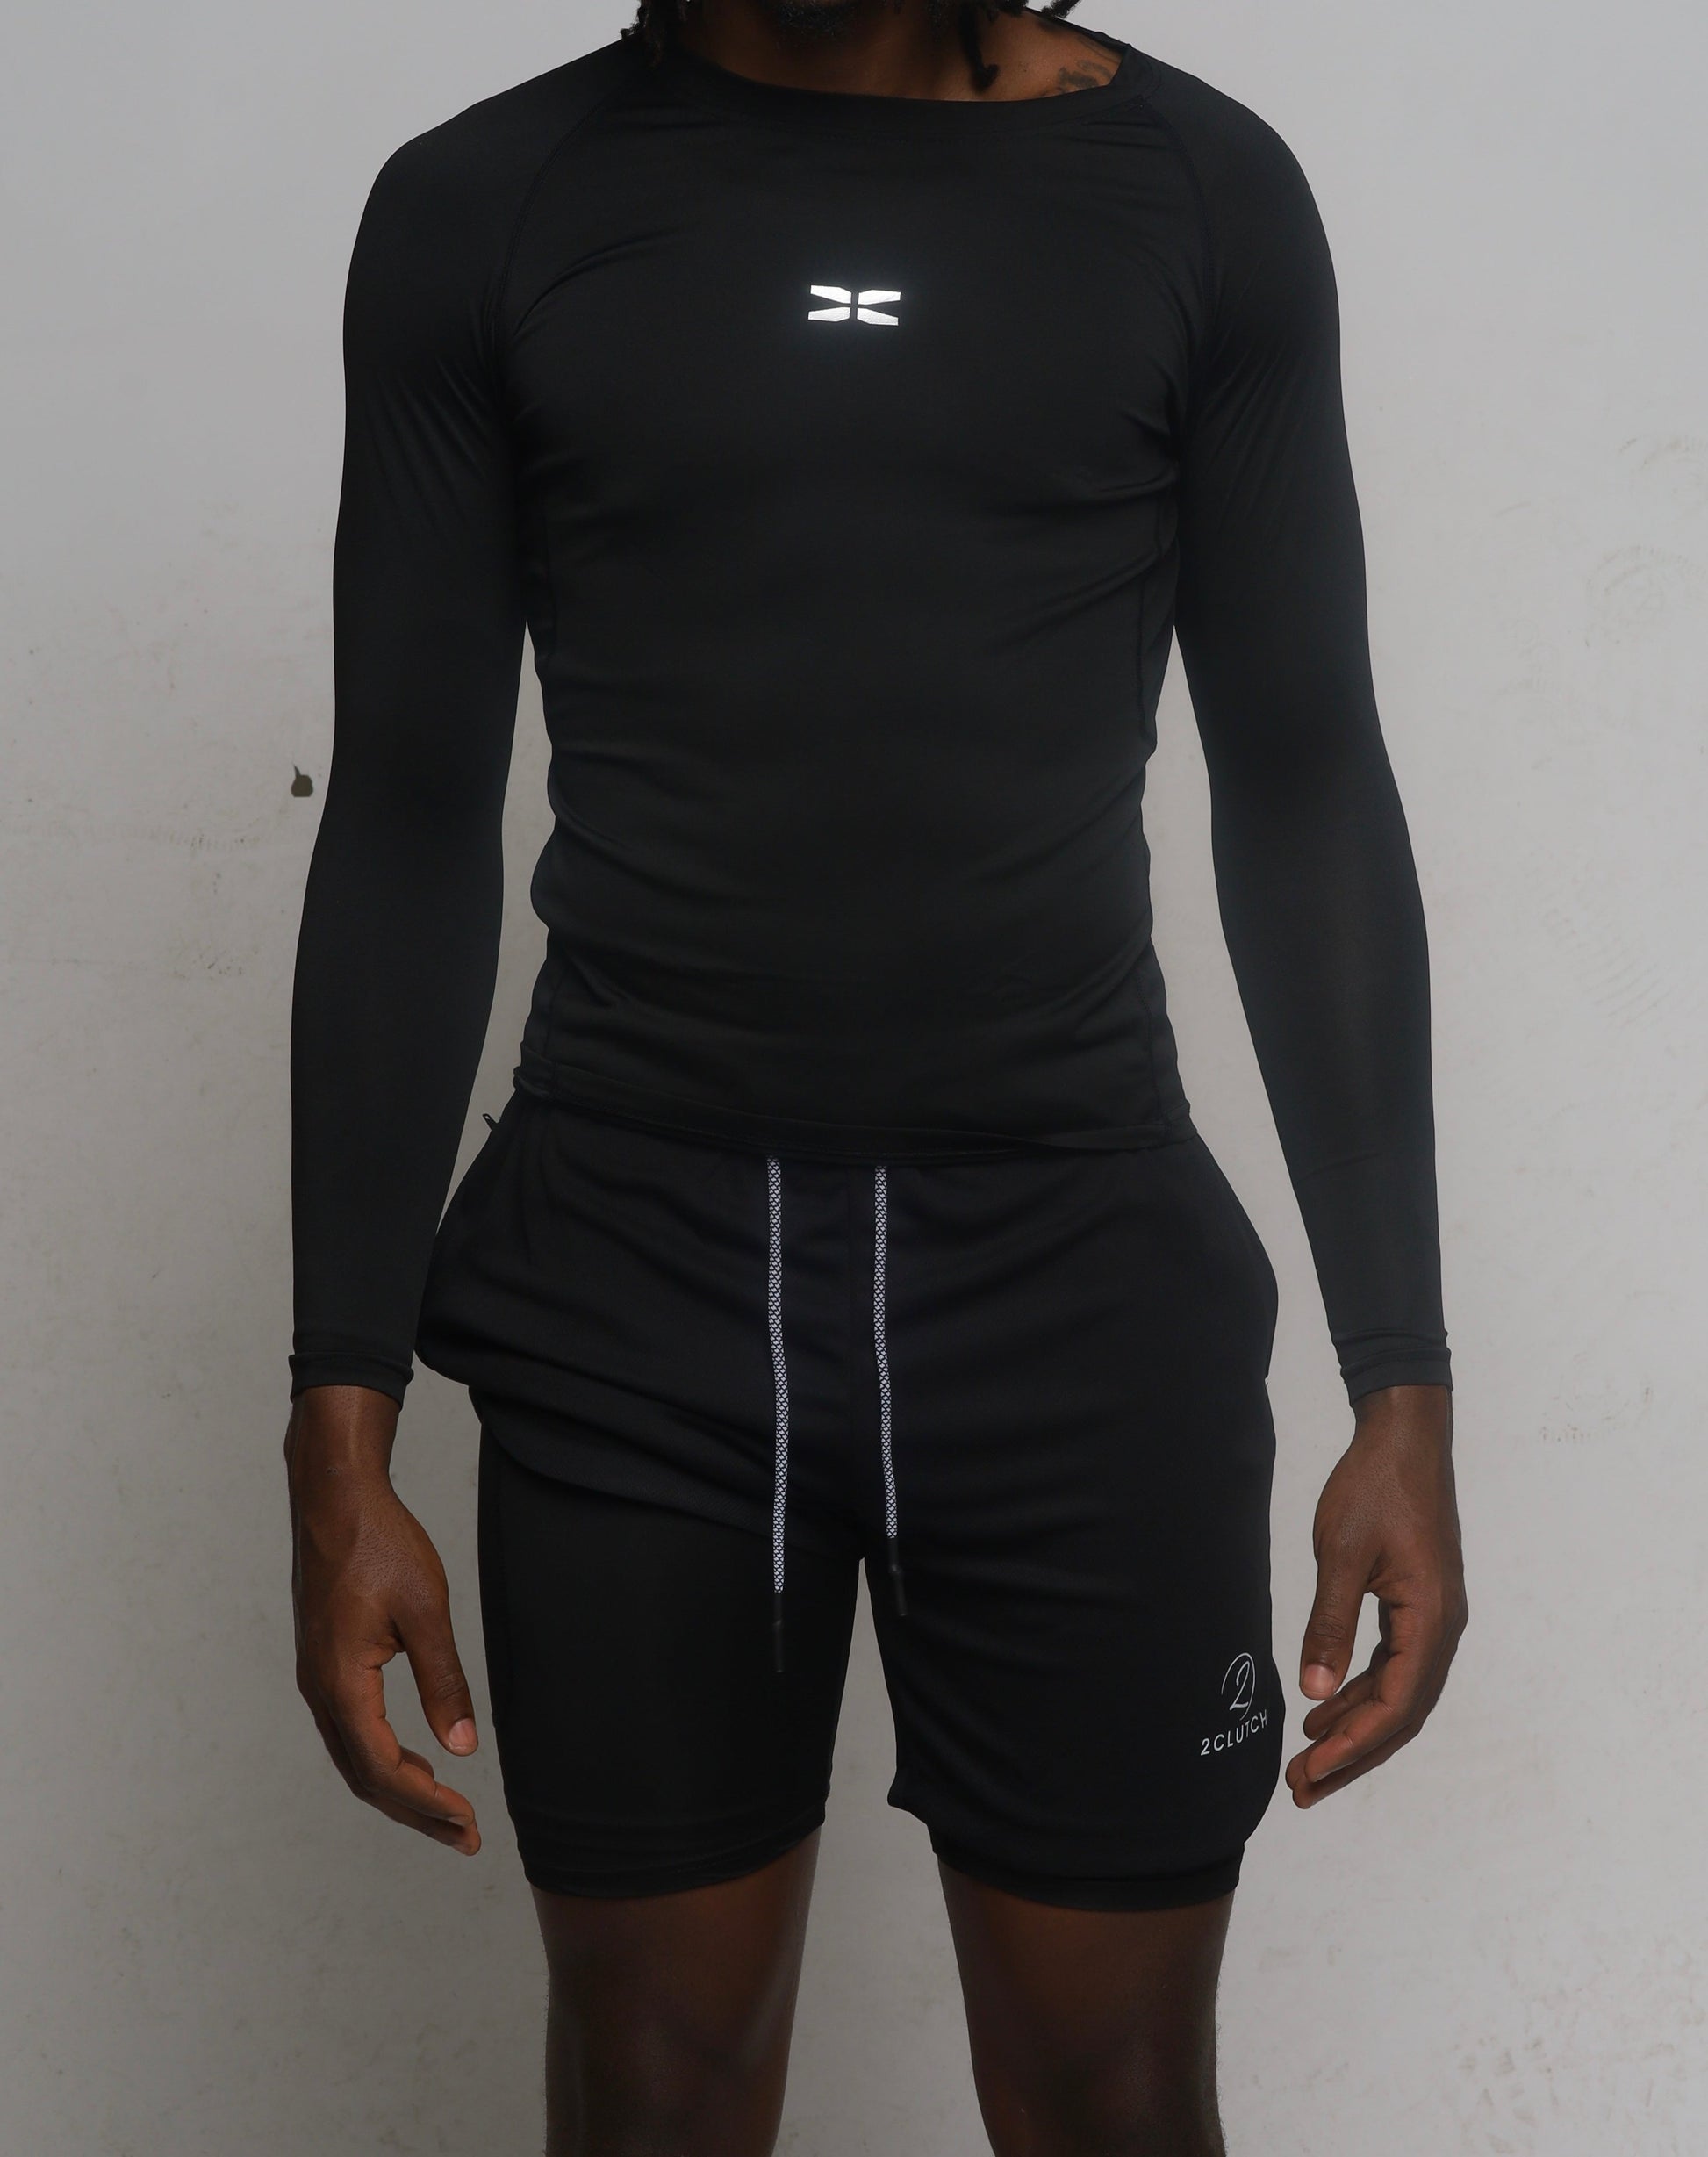 Black Shorts on tall male